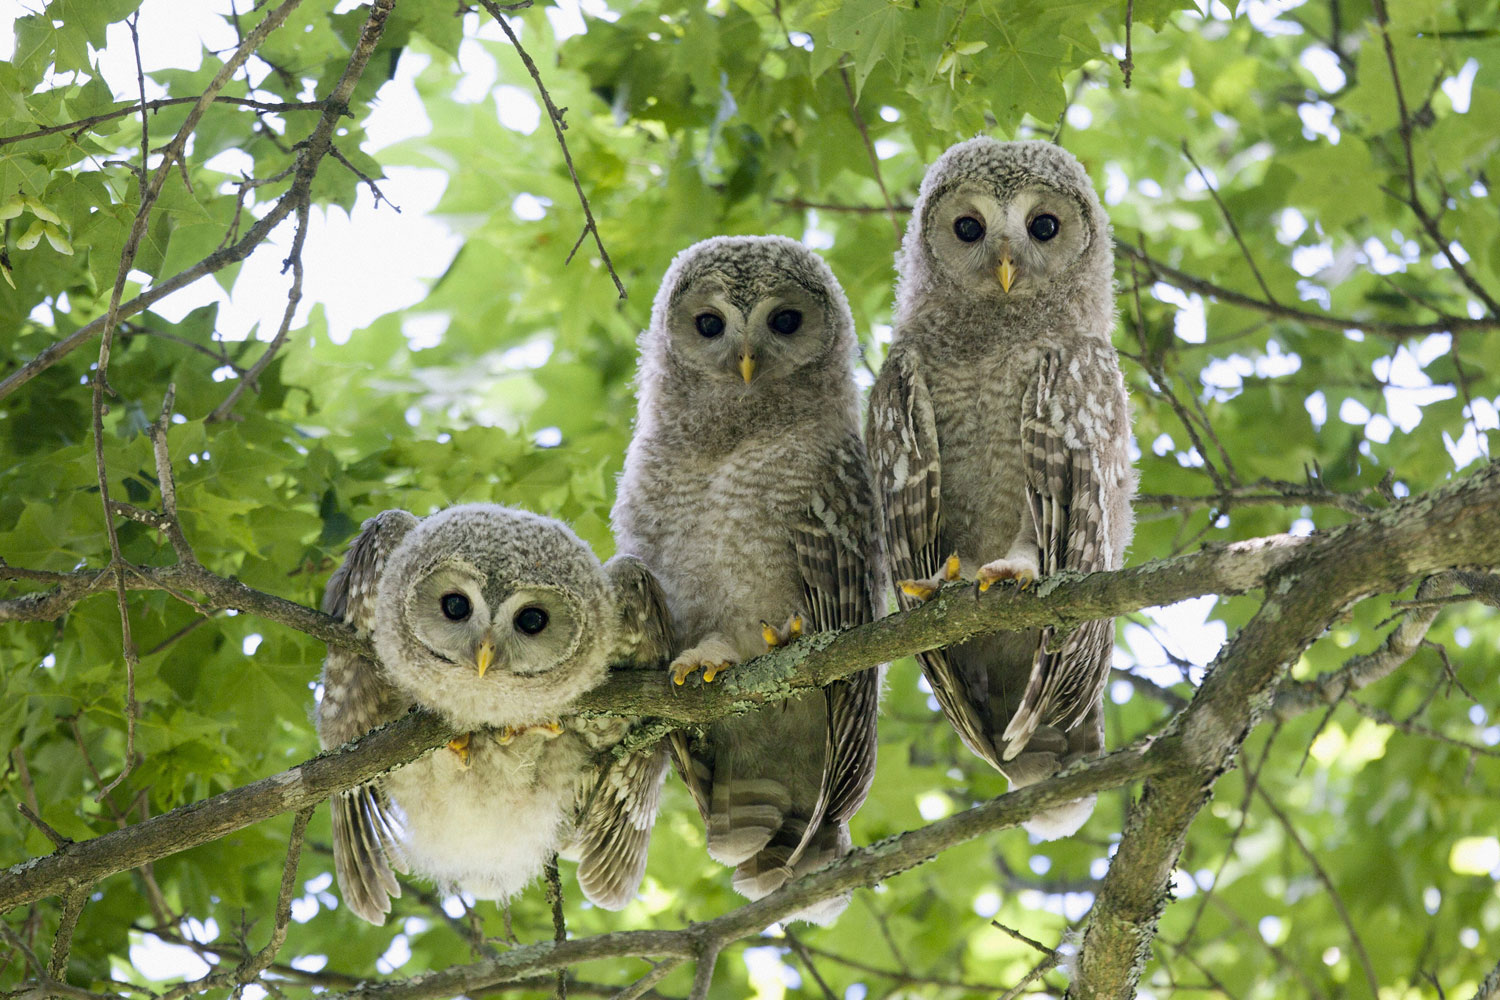 Three Ural owl chicks roost in a tree in the Kushiro area of Hokkaido, northern Japan, July 6, 2011.